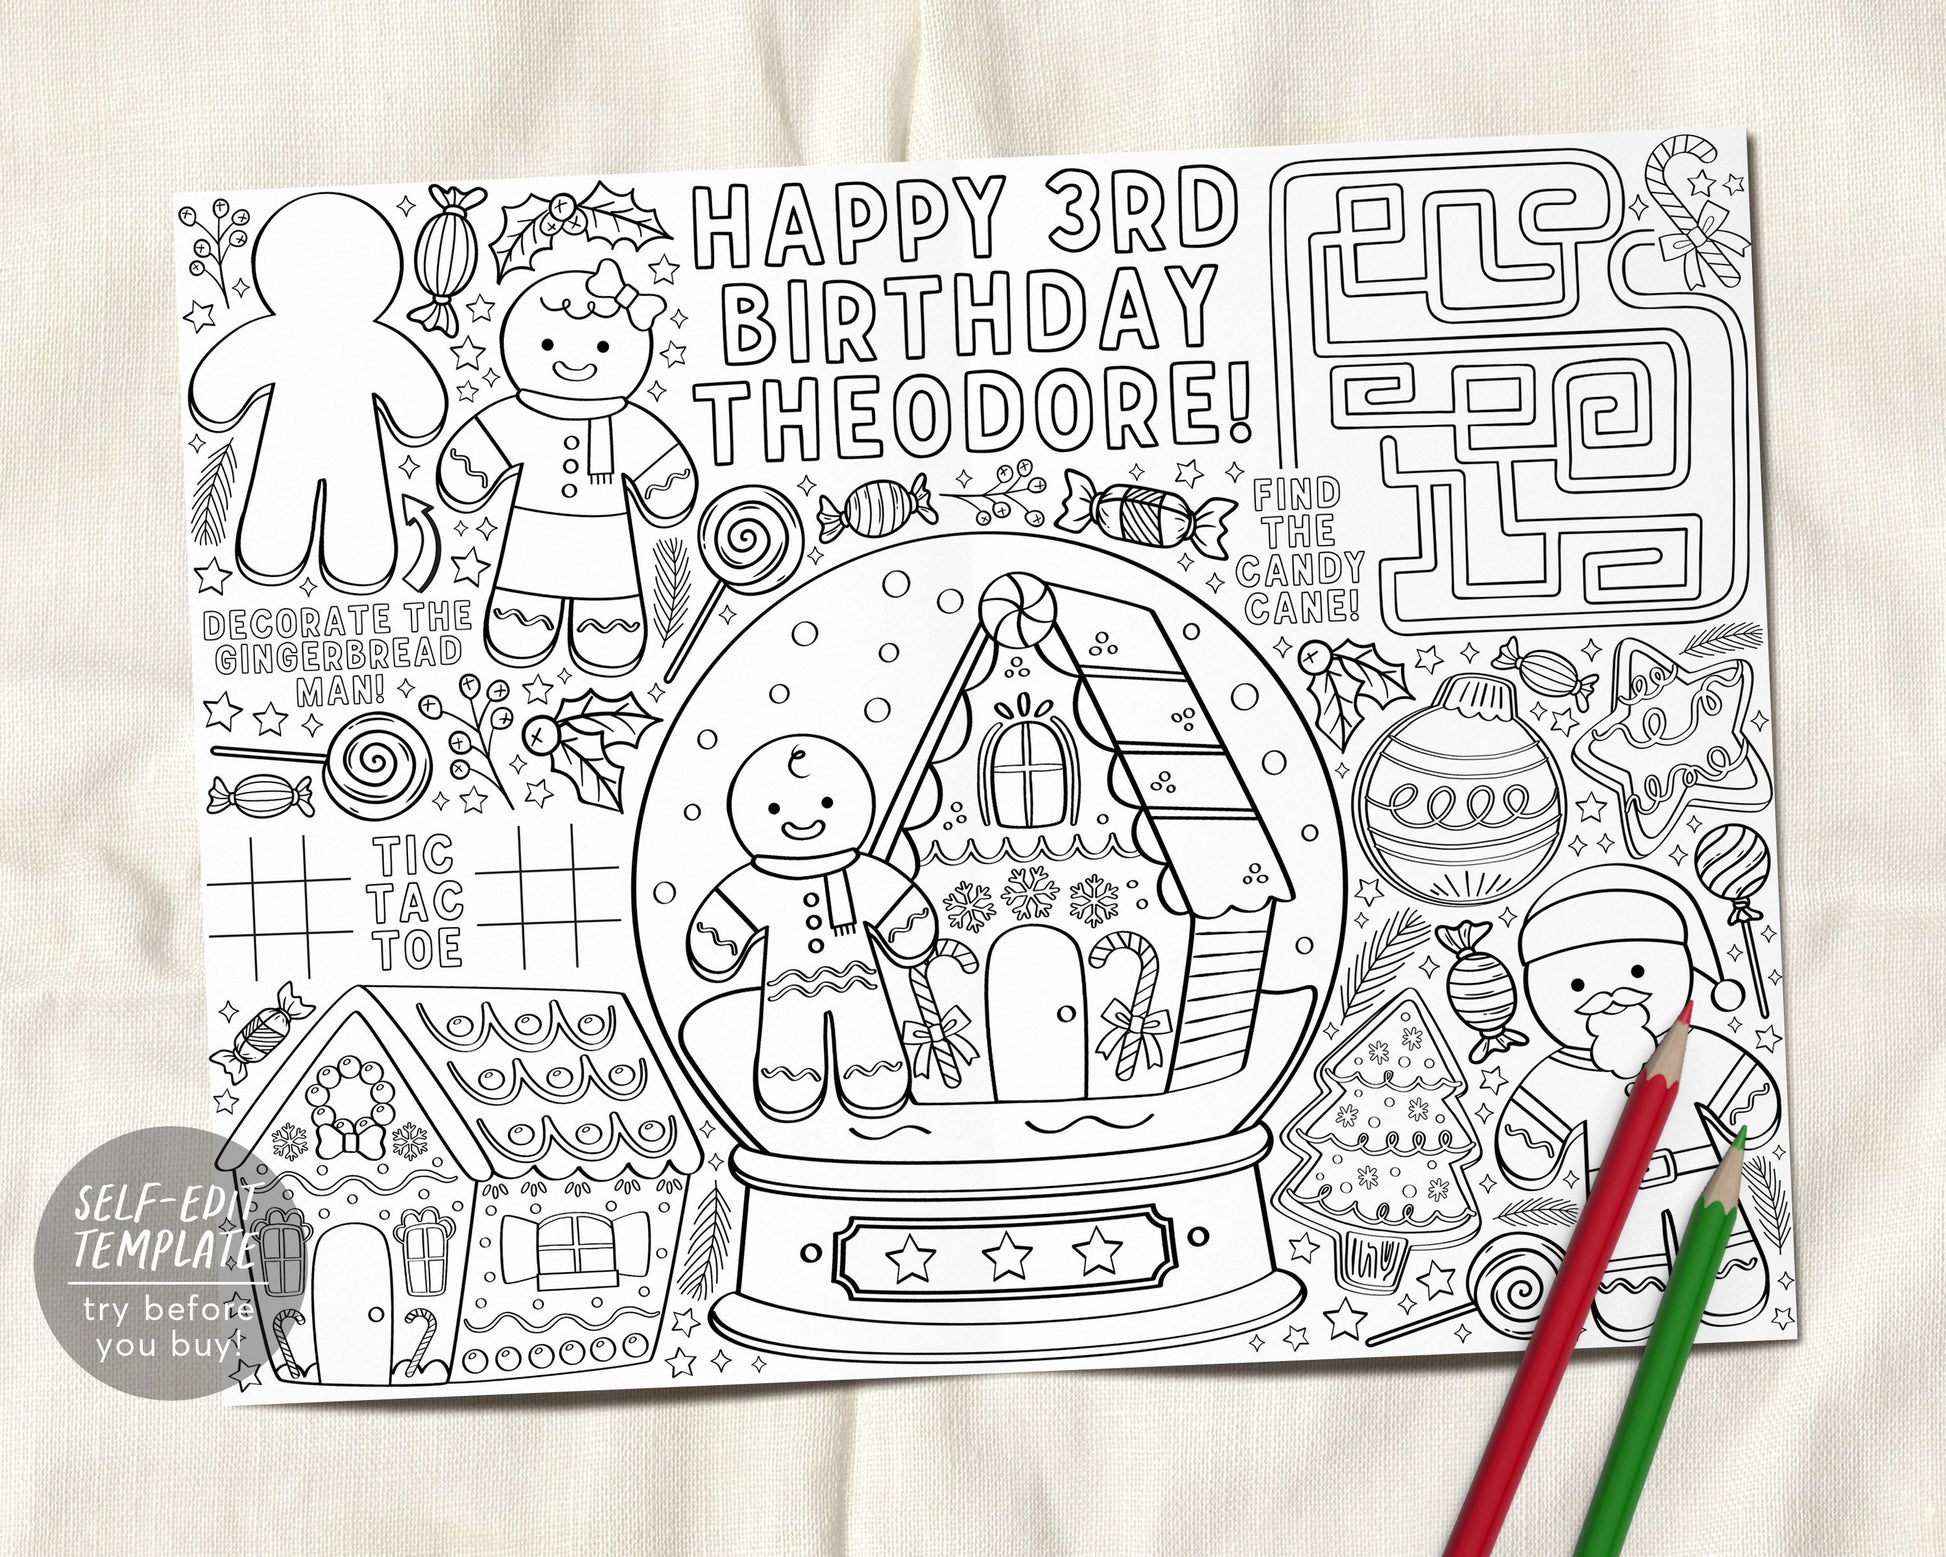 Gingerbread House Decorating Party Birthday Coloring Page Placemat Editable Template